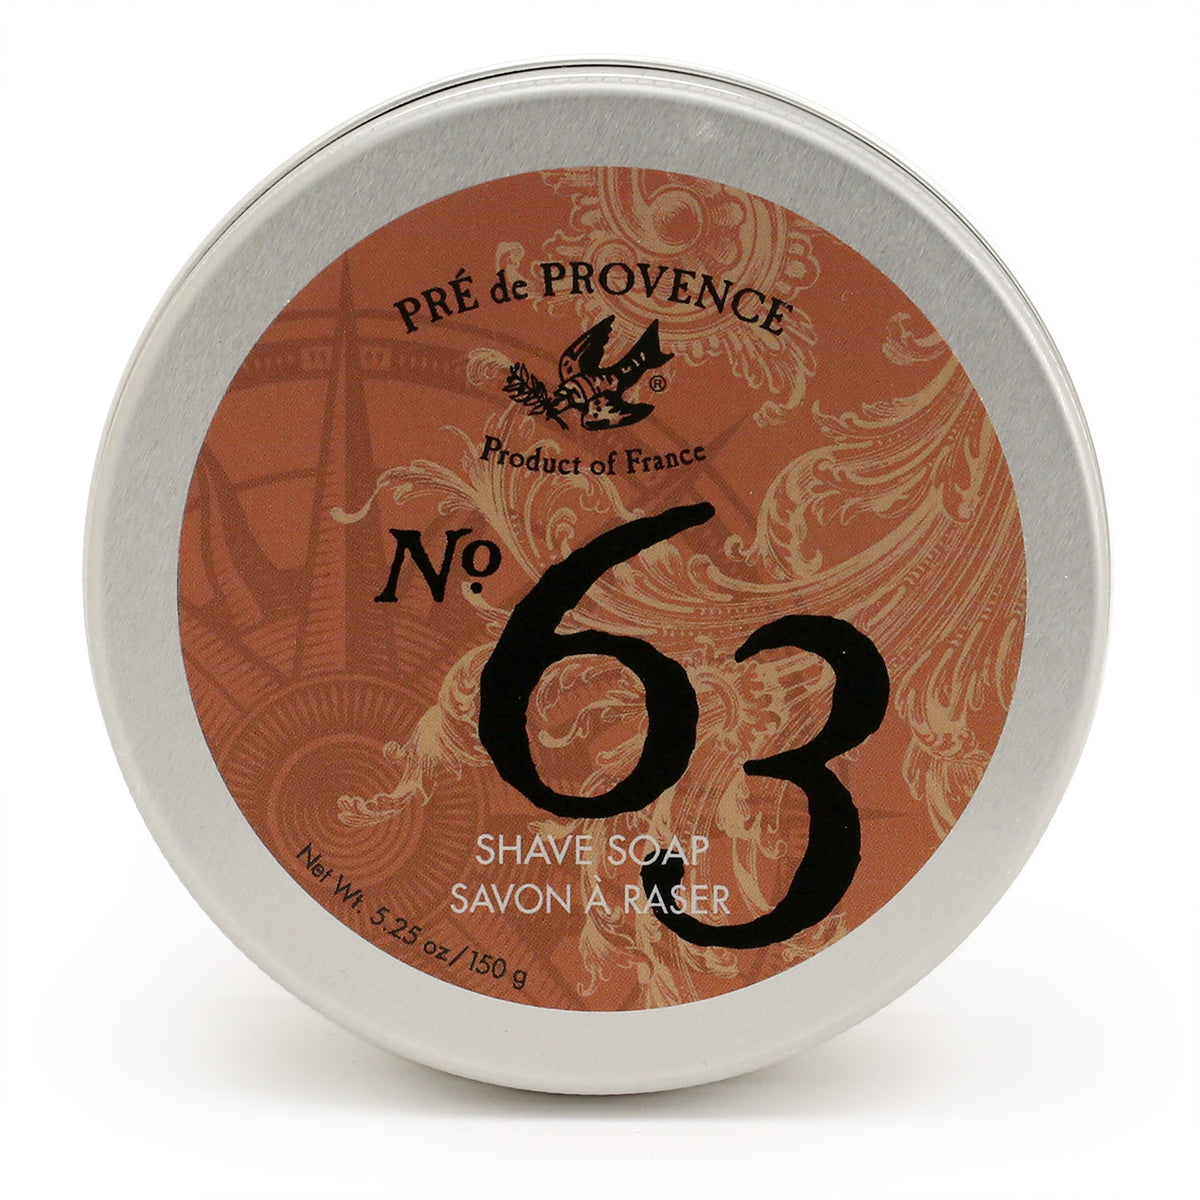 Pre de Provence 63 SHaving soap, showing the top of the tin with ornate orange and black label